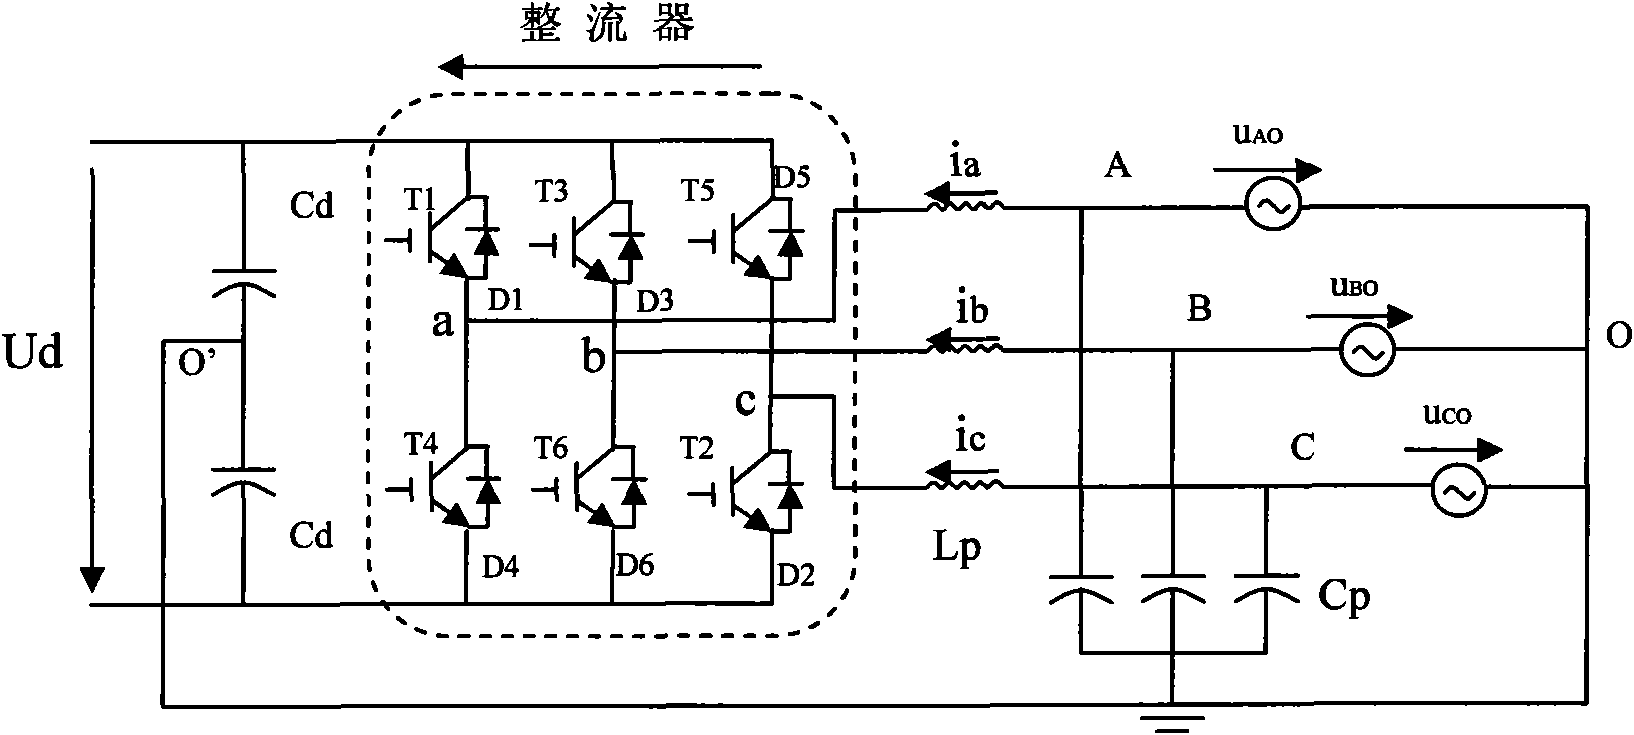 Energy storing device for supplying valley current at peak of current supply